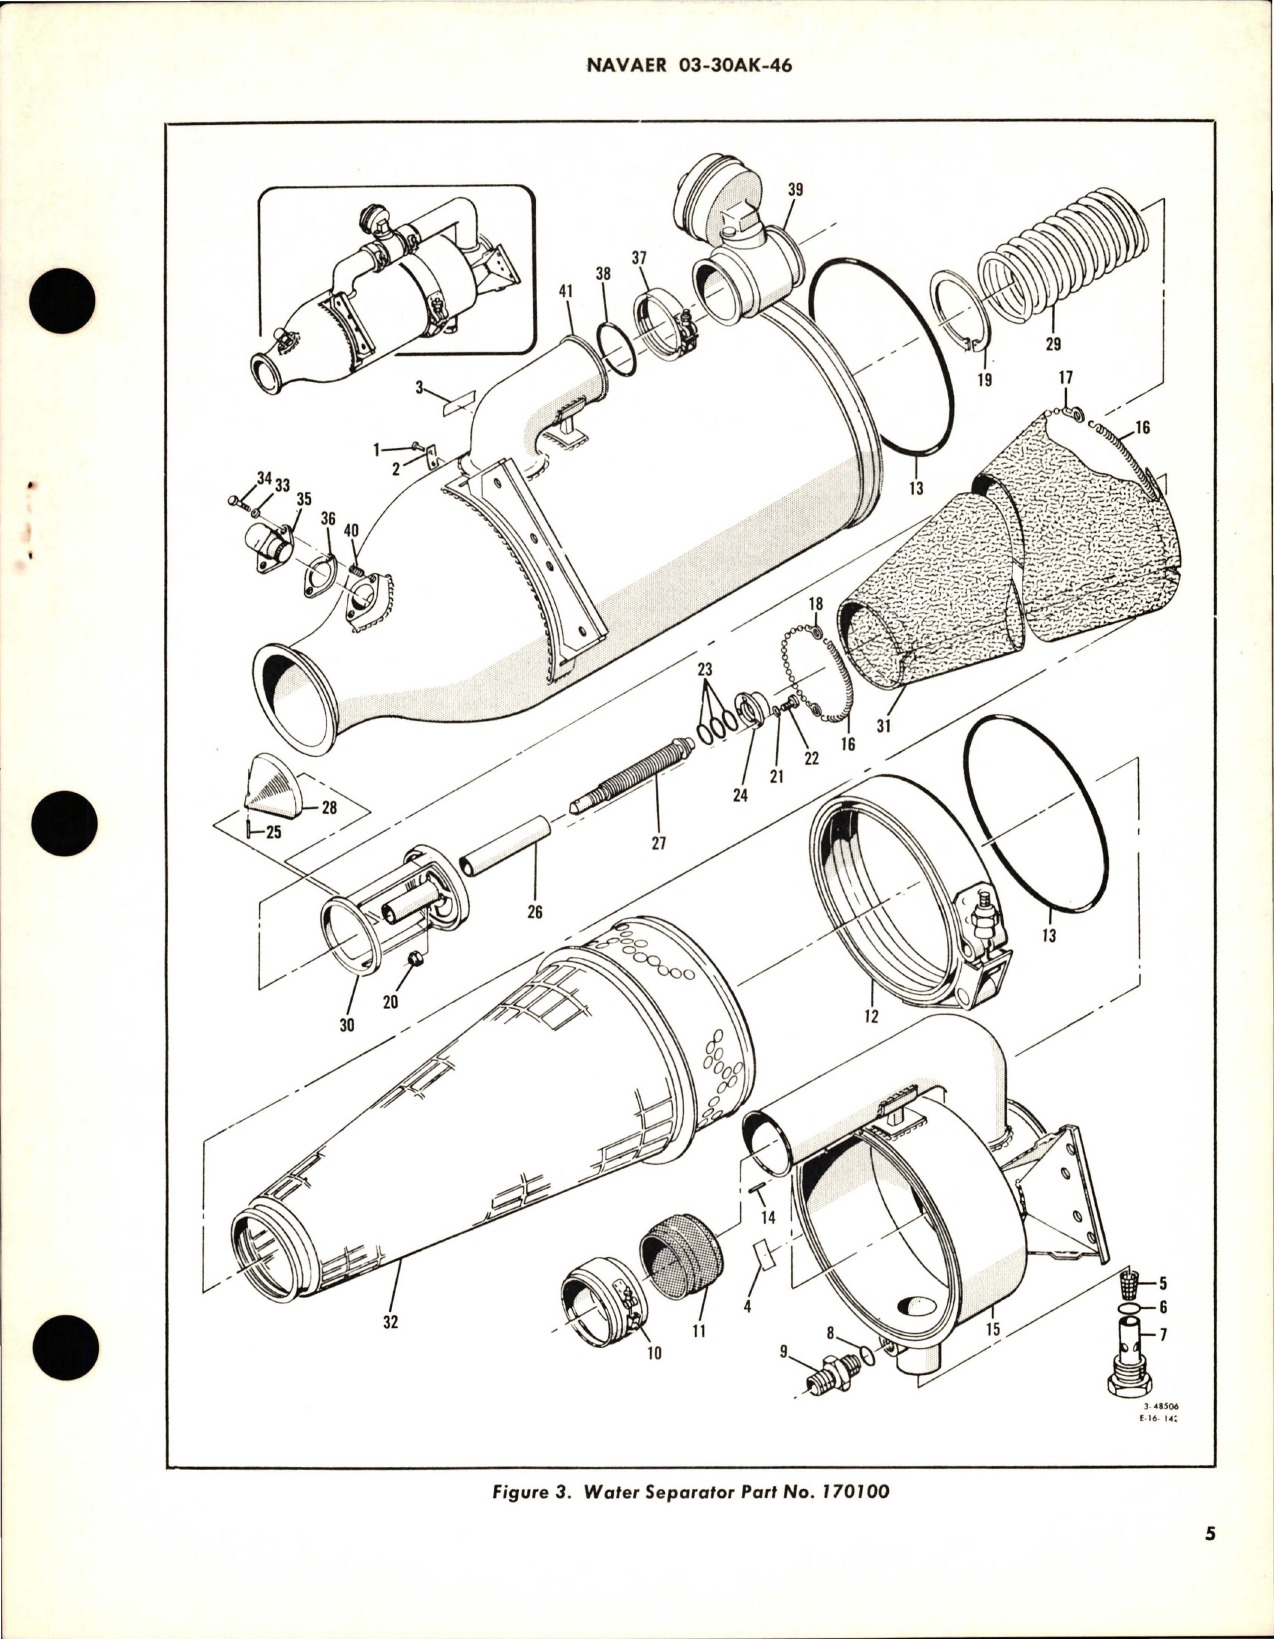 Sample page 5 from AirCorps Library document: Overhaul Instructions with Parts Breakdown for Water Separator - Part 170100 - Model WSSC14-5-1 